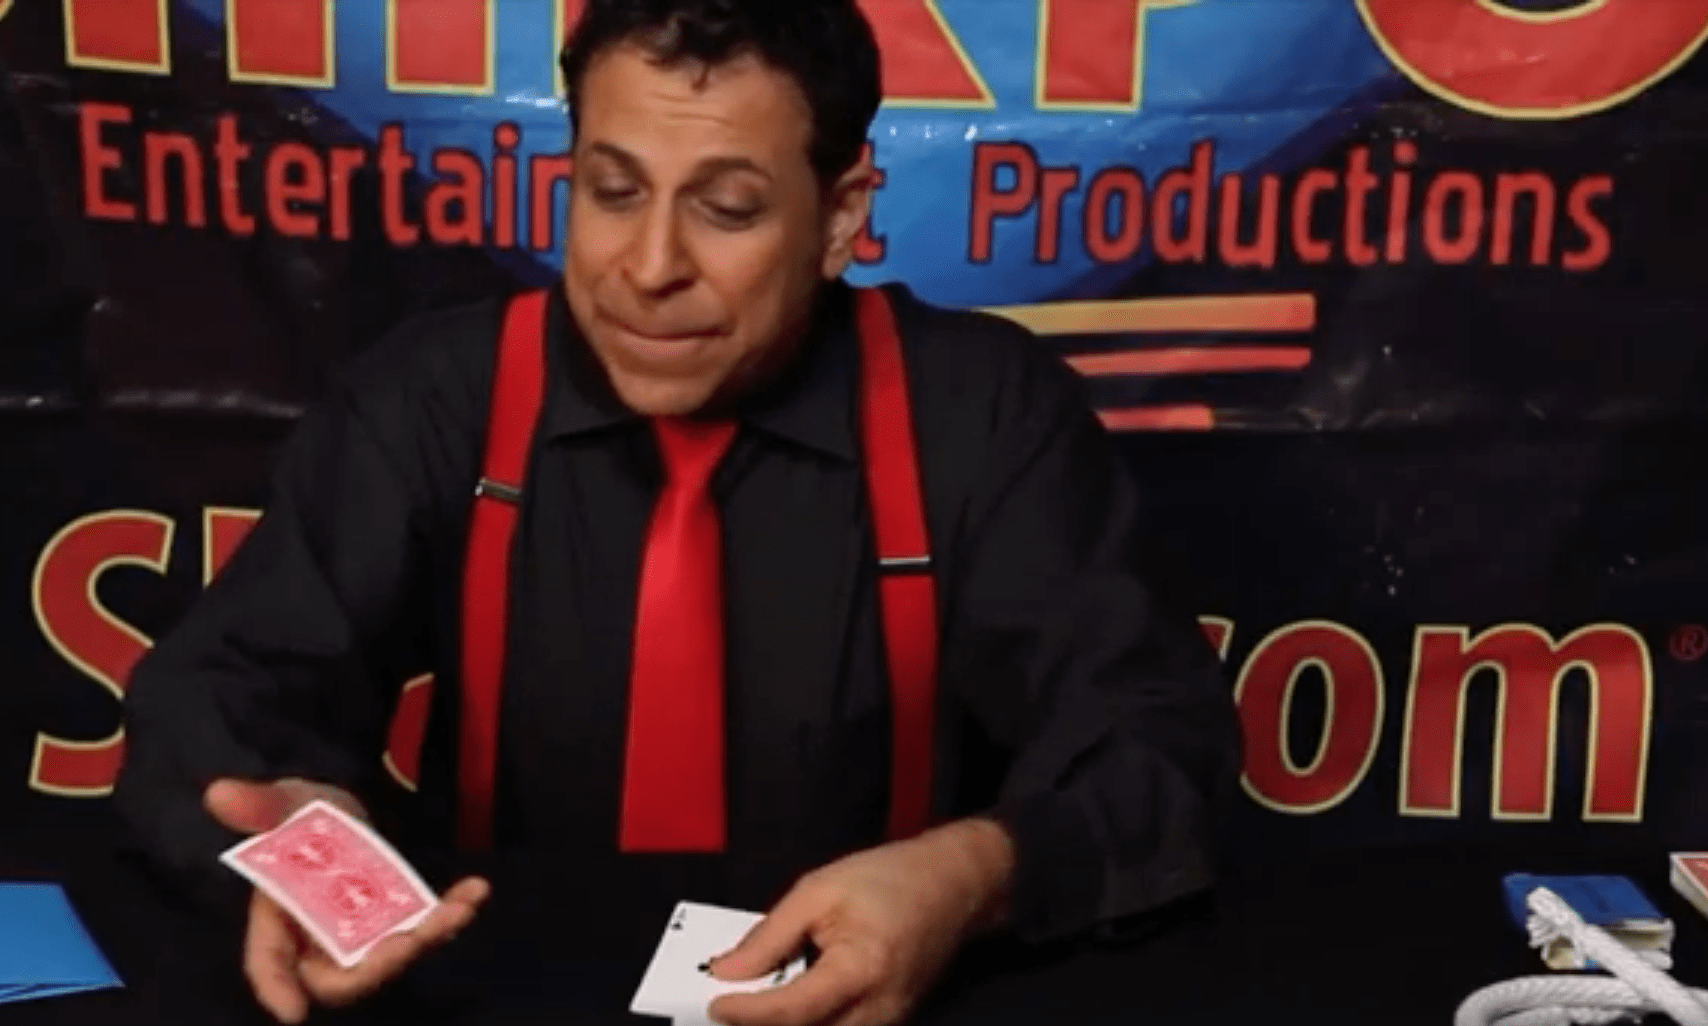 Sharpo displays the cards before landing the kicker in a fantastic magic routine.